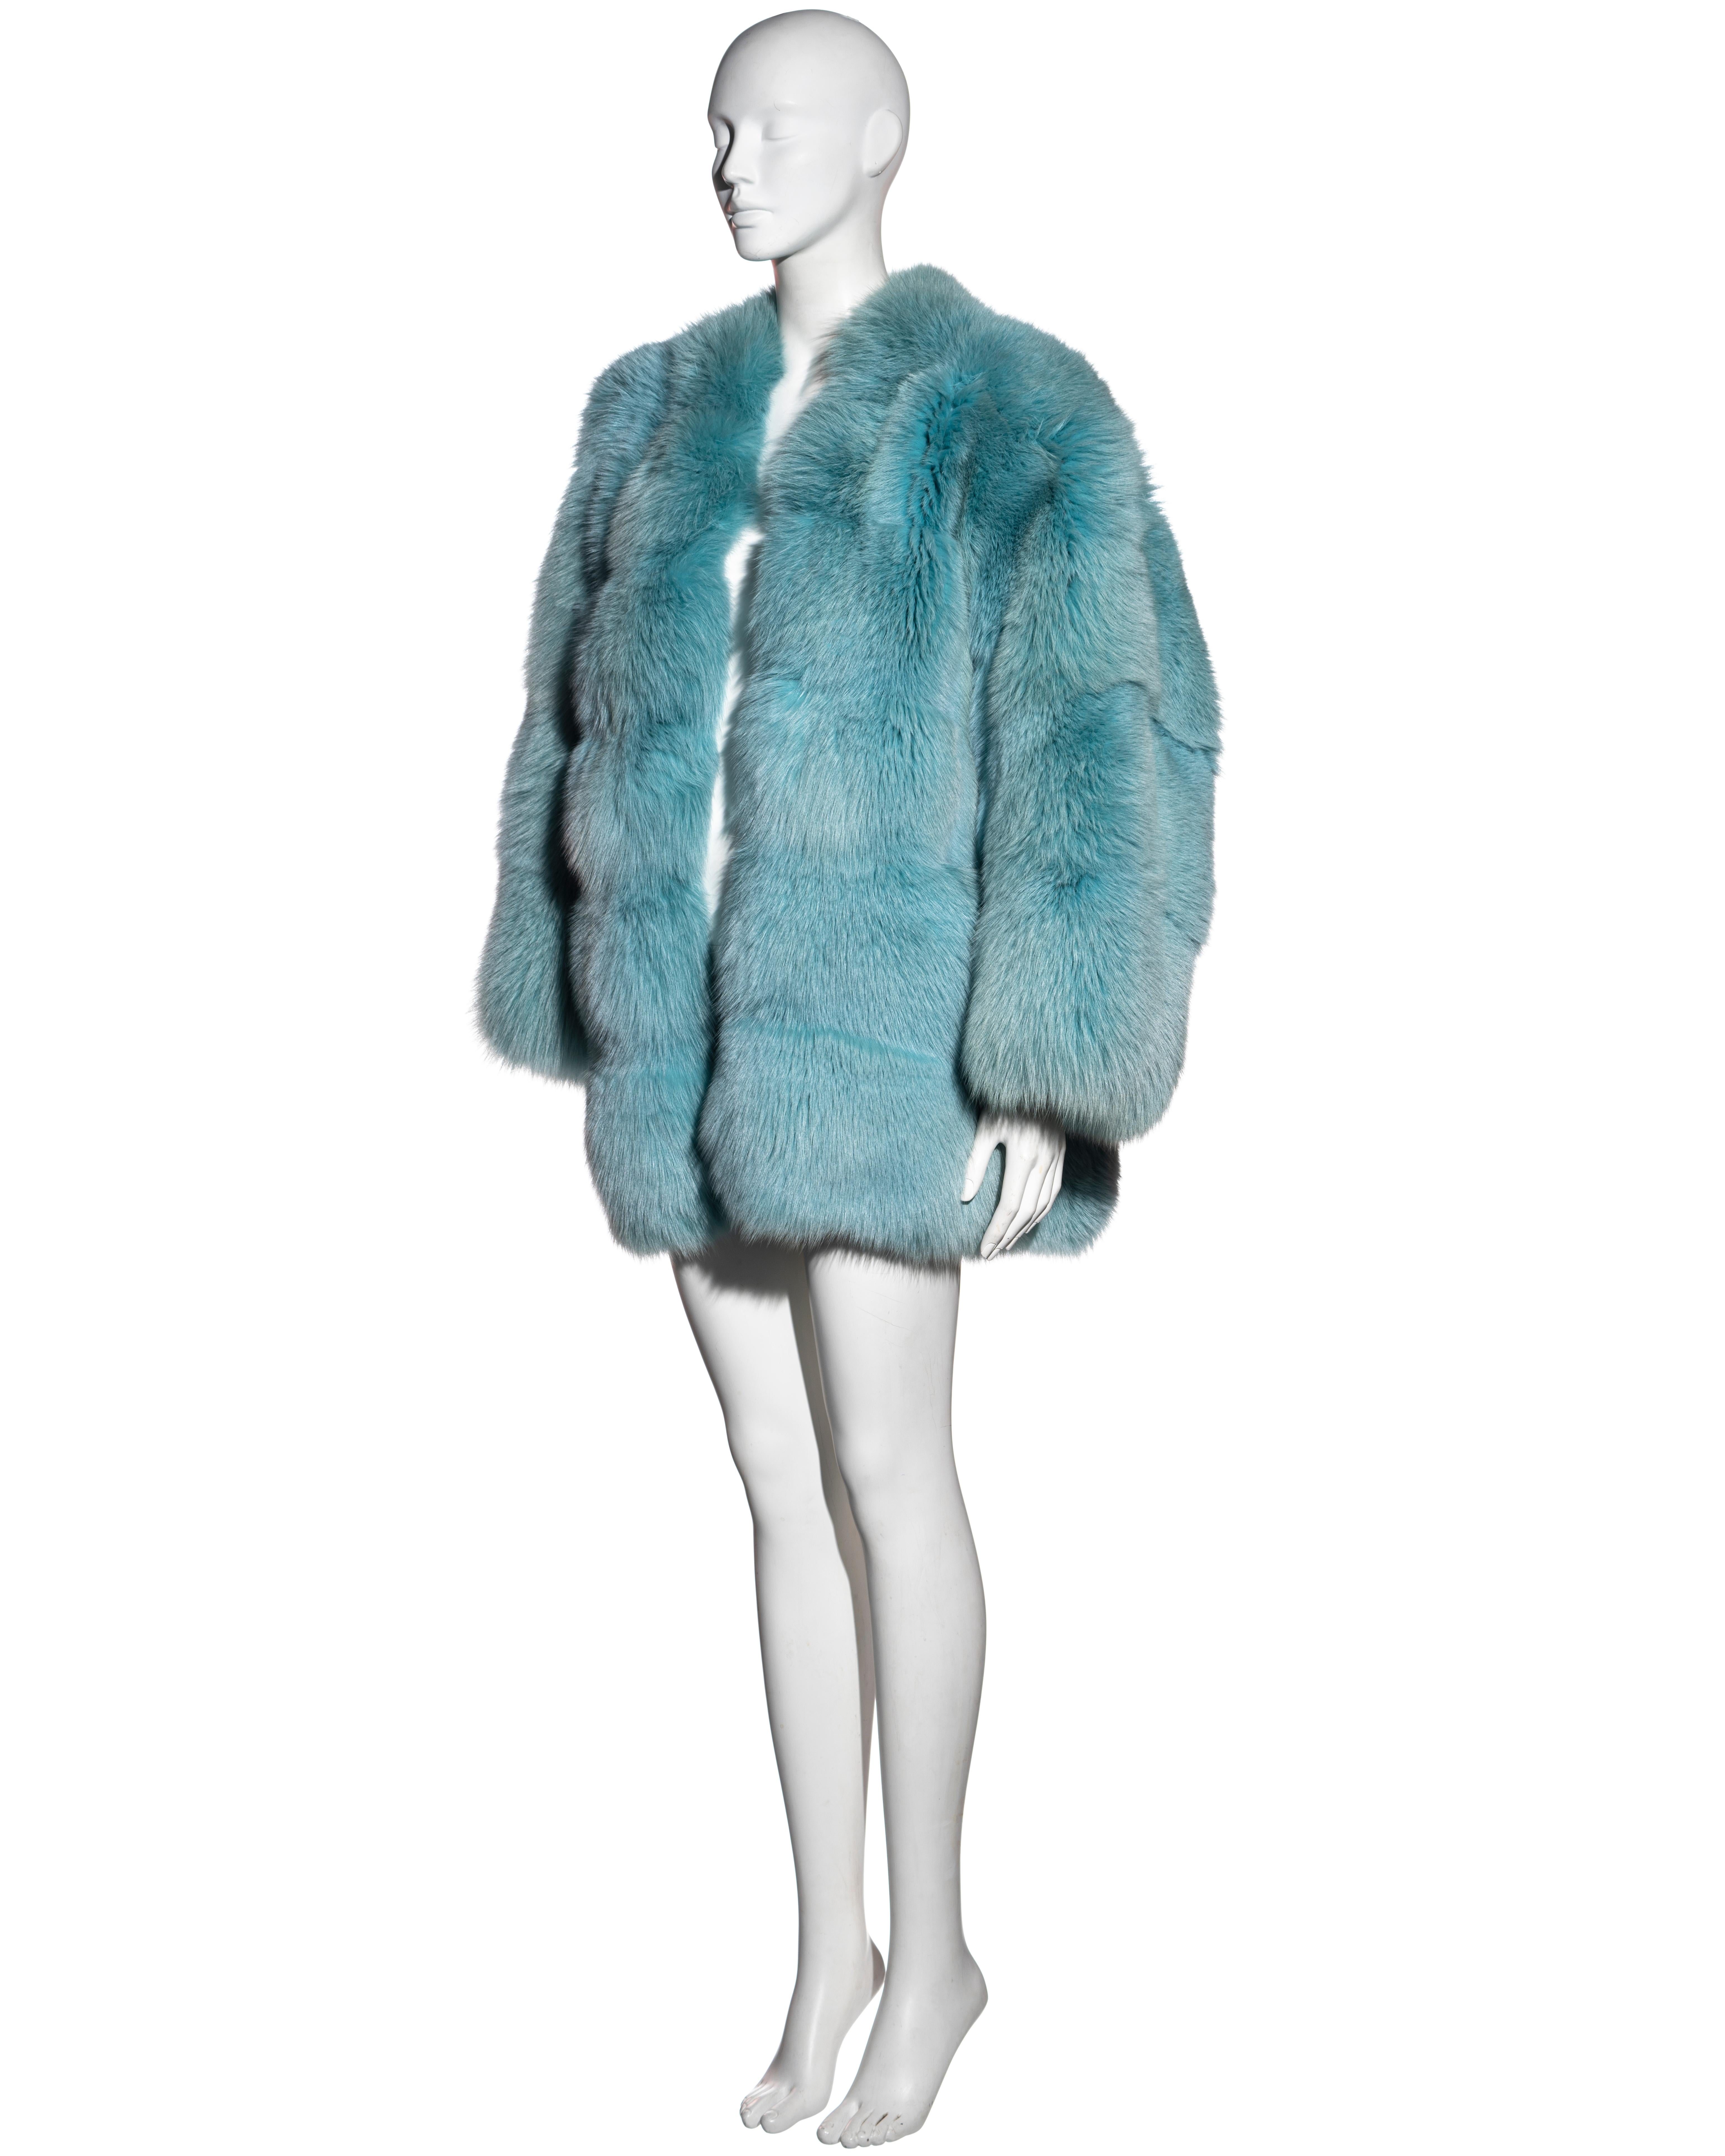 ▪ Gucci iconic aqua blue fox fur coat
▪ Designed by Tom Ford
▪ Oversized fit
▪ Open front 
▪ Two open pockets to the front 
▪ Gucci monogram lining 
▪ IT 40 - FR 36 - UK 8
▪ Fall-Winter 1997